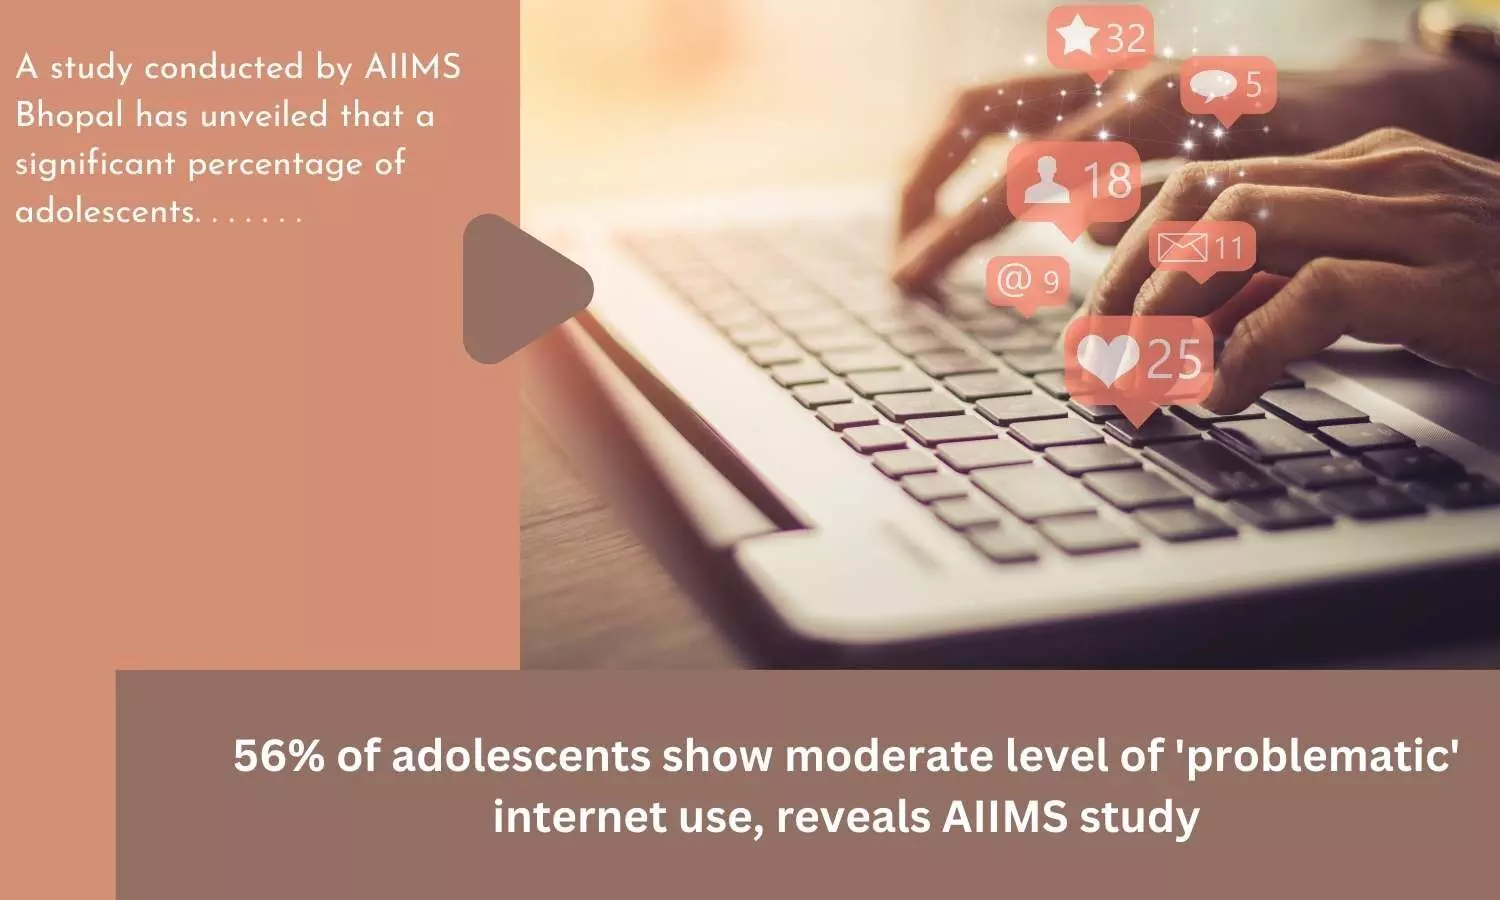 56% of adolescents show moderate level of problematic internet use, reveals AIIMS study